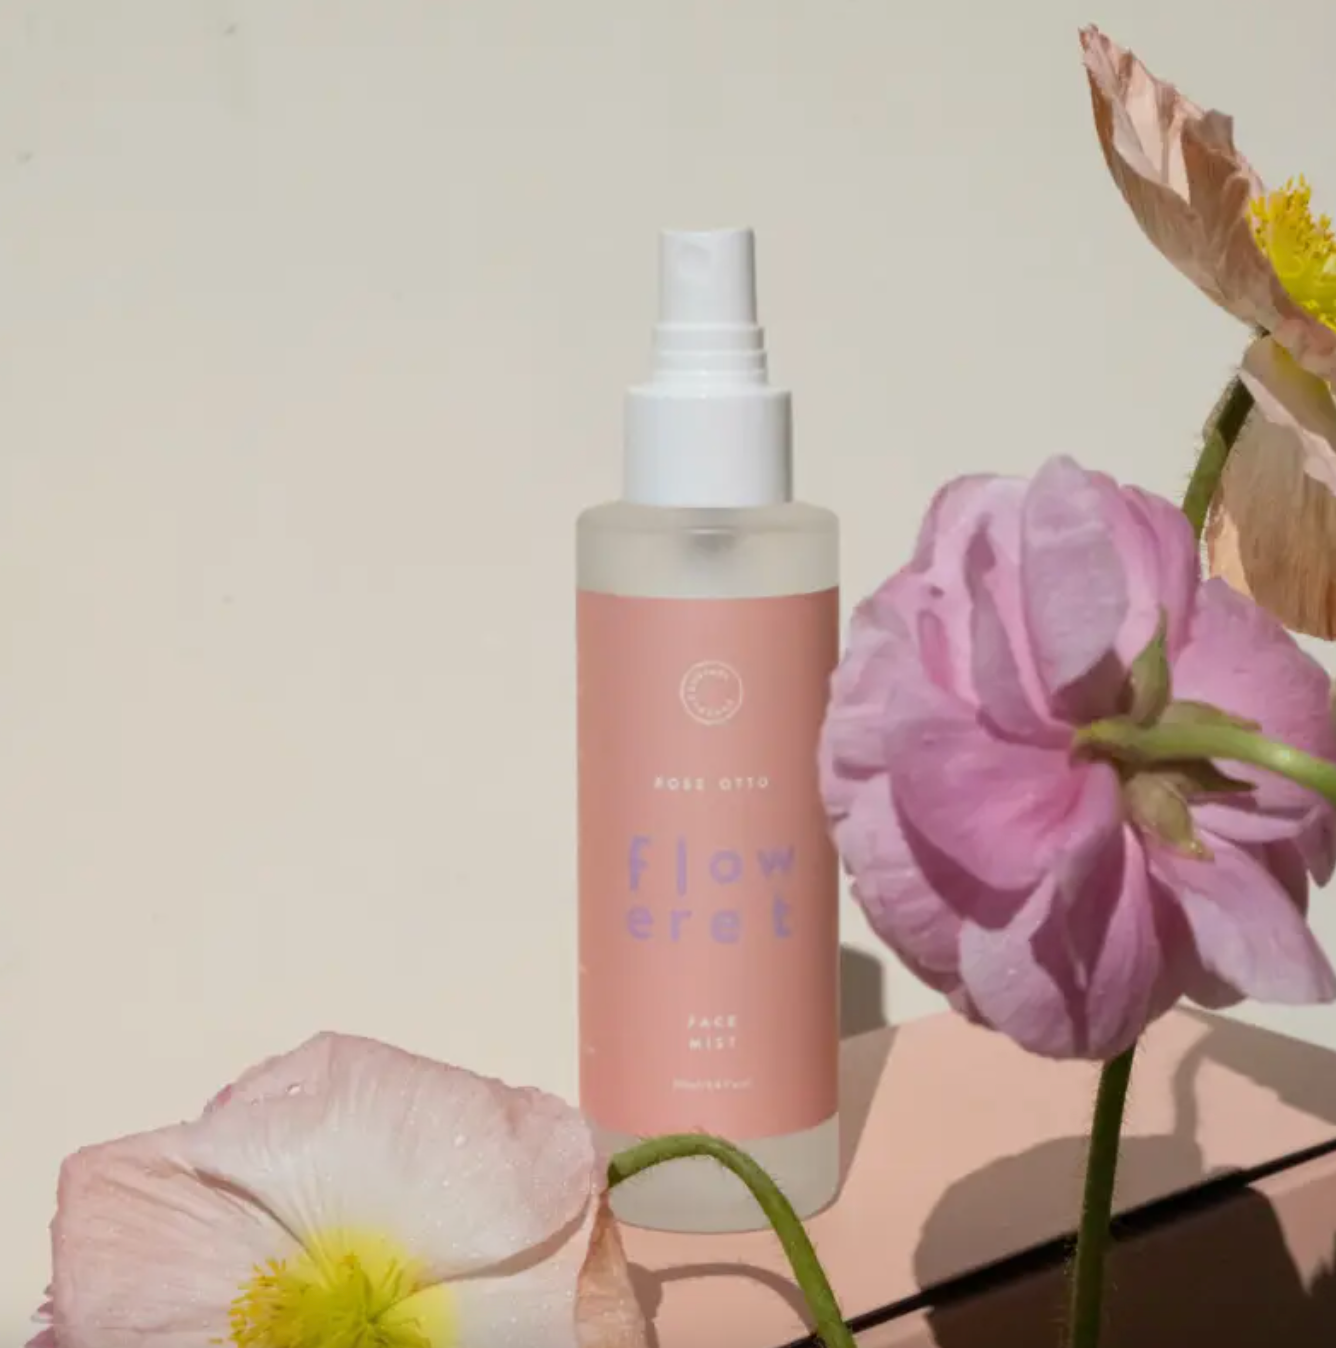 Courtney and the Babes - Floweret Rose Otto Face Mist